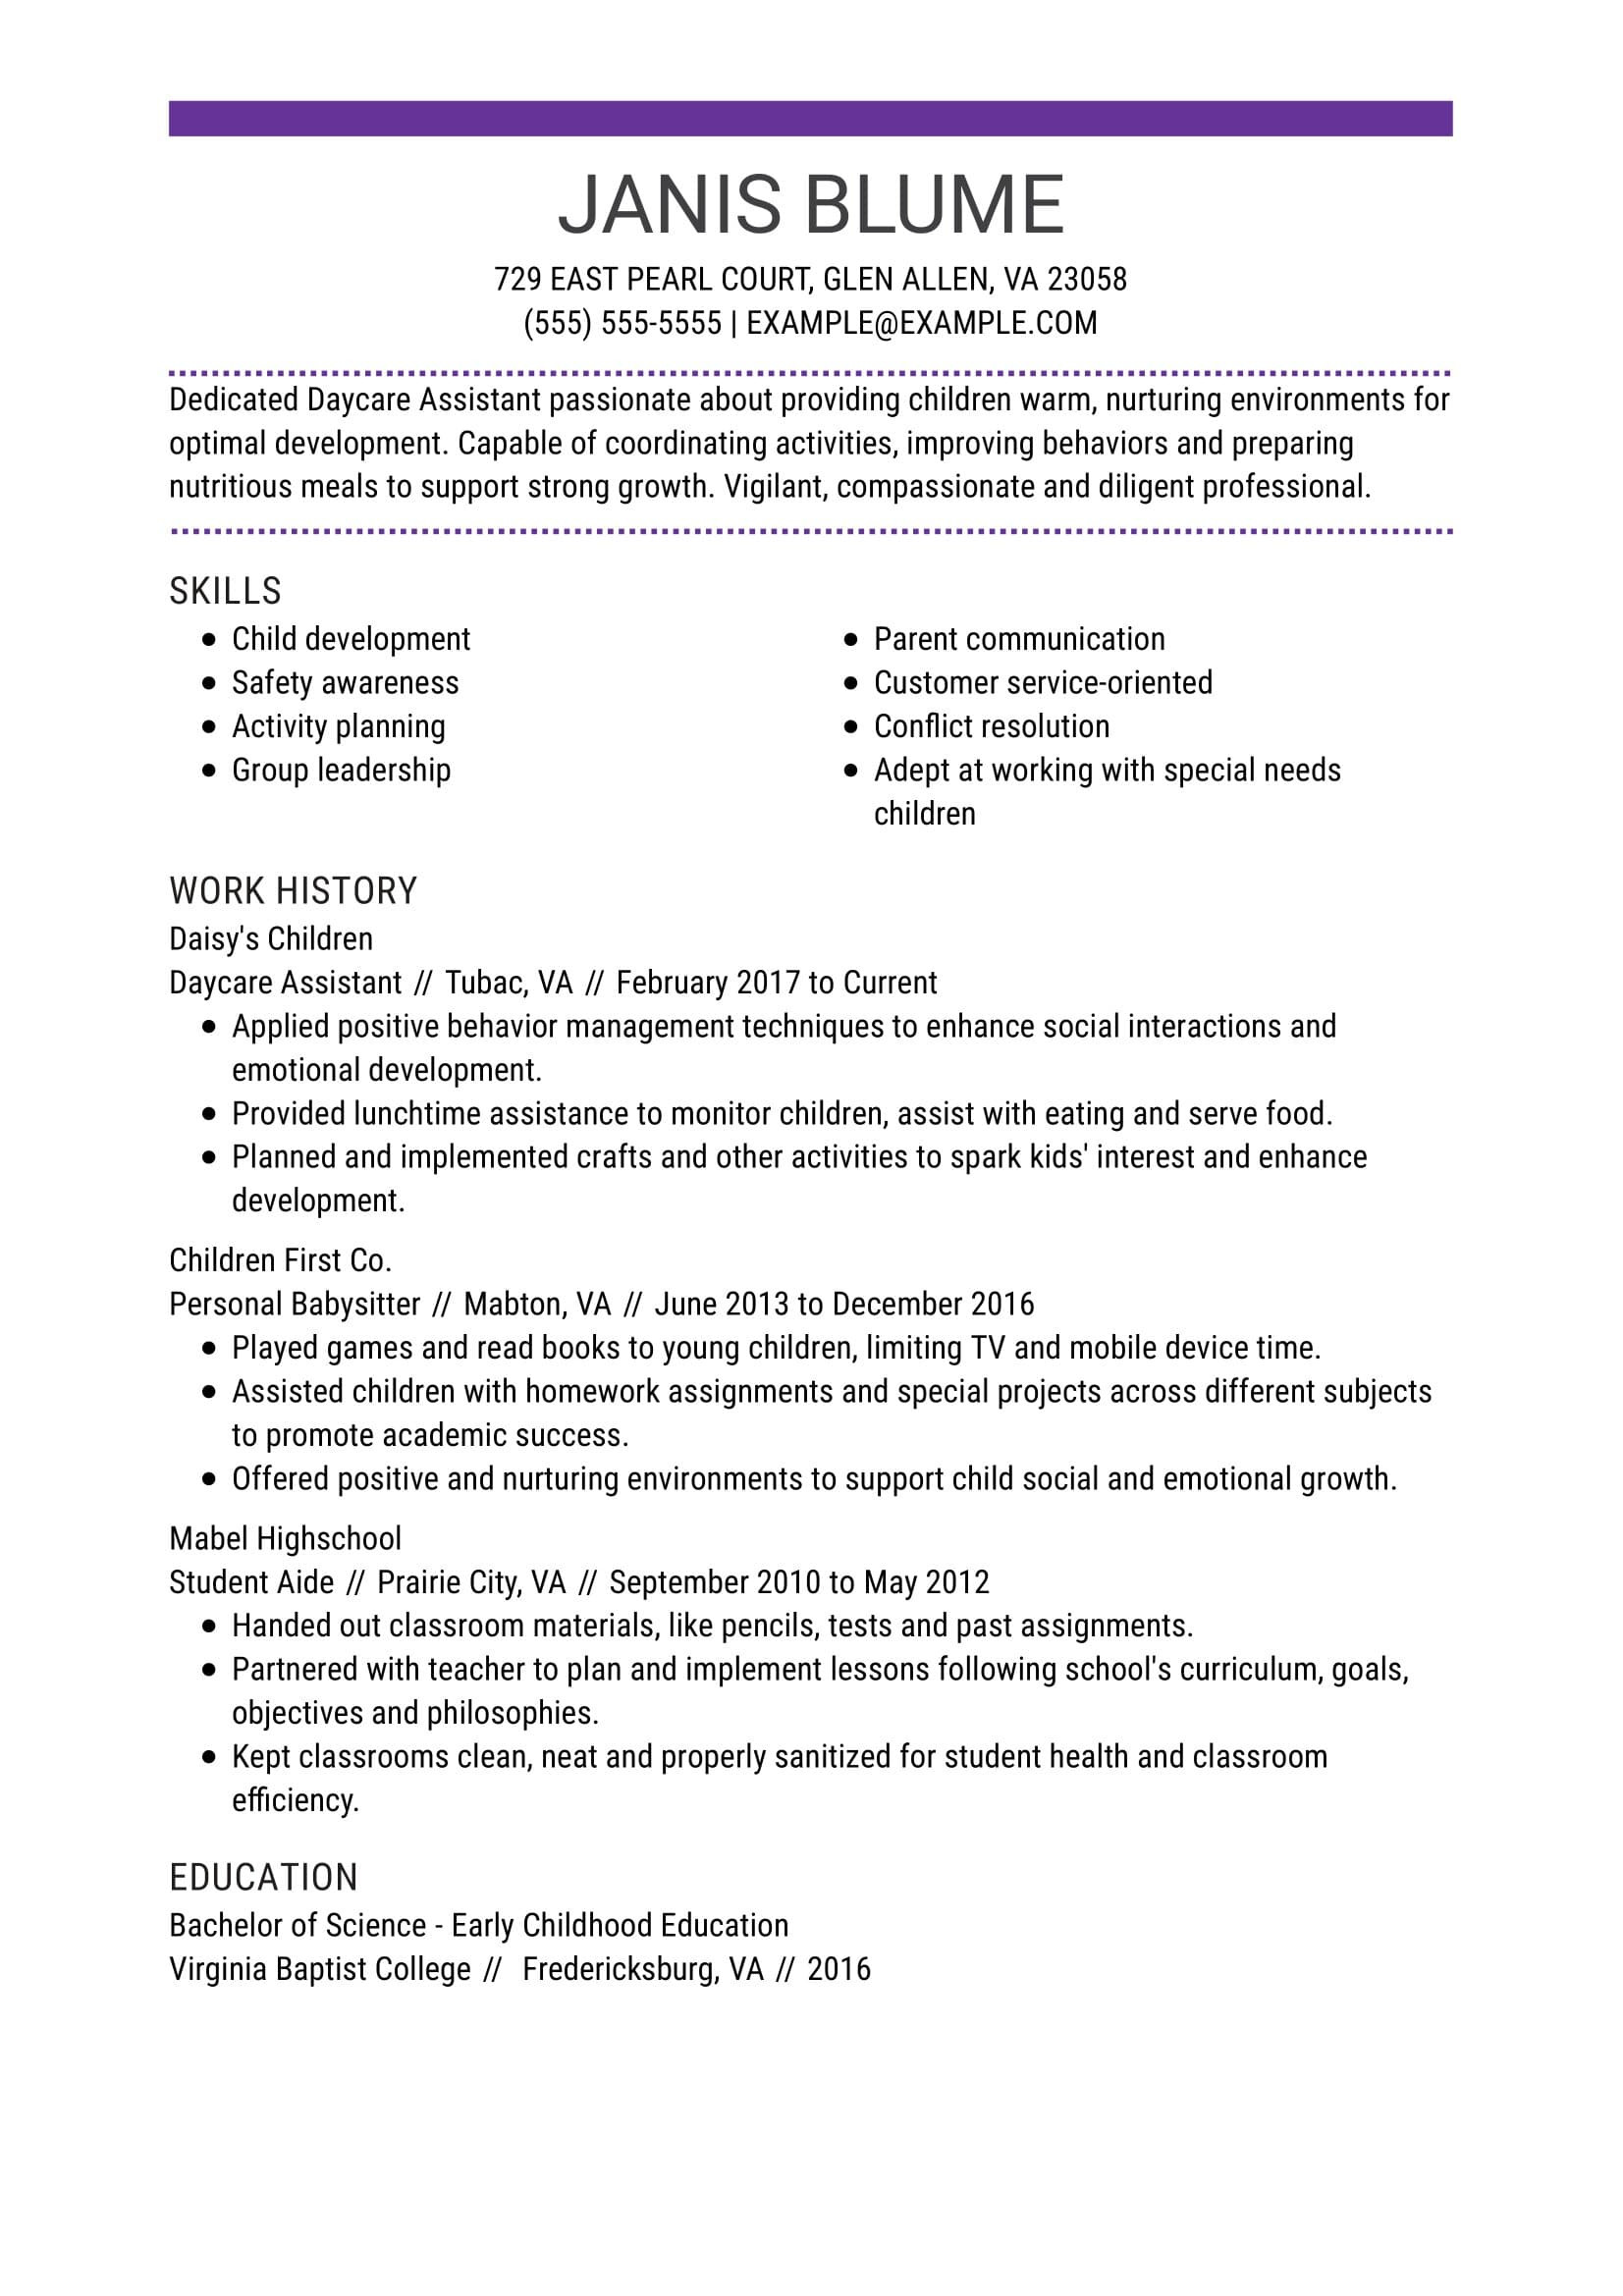 Free Sample Resume Cgild Protective Services Manager Bilingual Basic Resume Templates for 2022 (free Downloads)